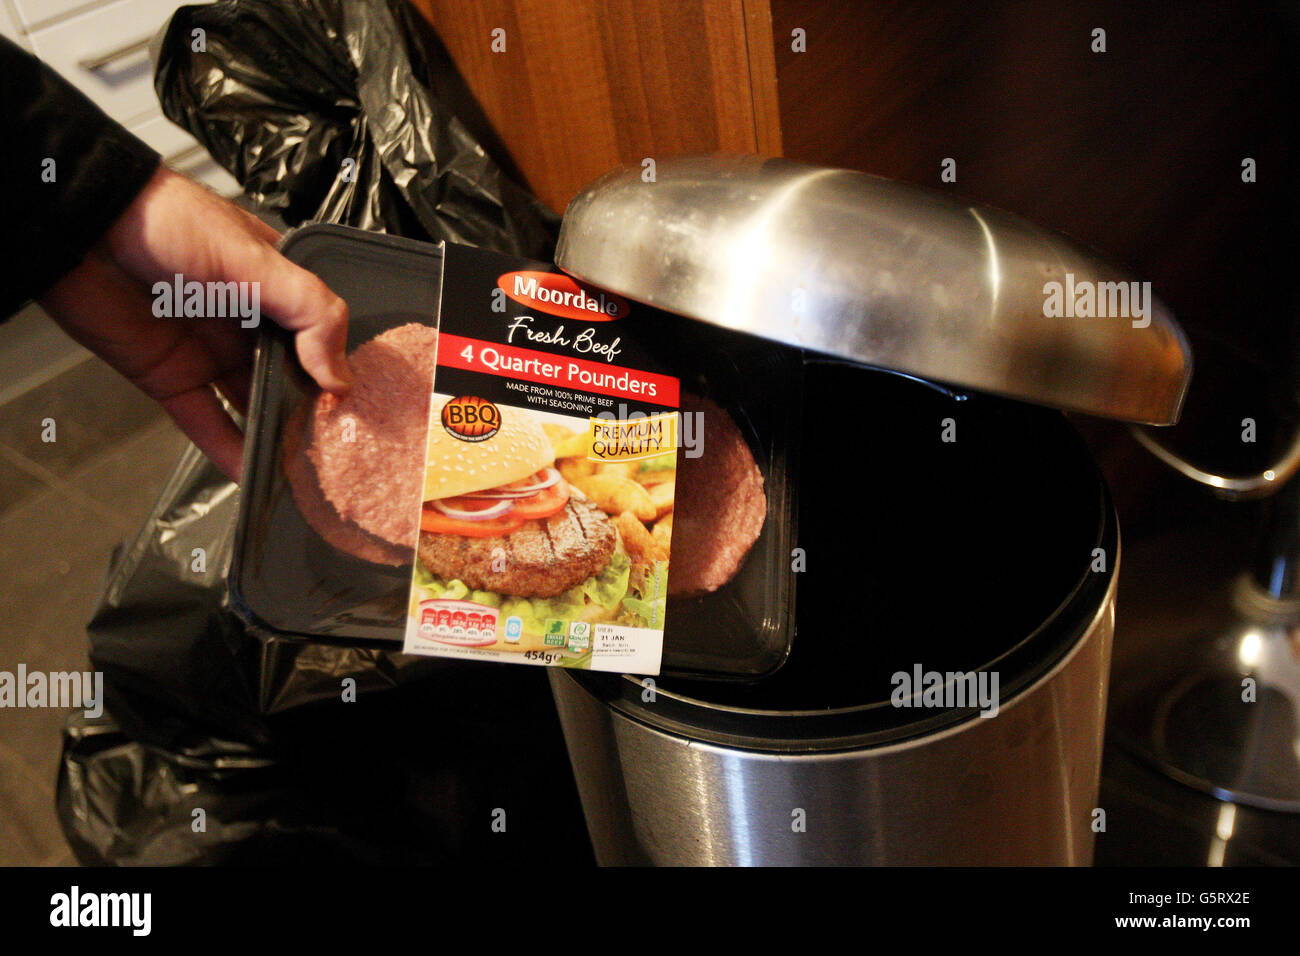 Horse meat found in beef products. A packet of Burgers is thrown into a bin. Stock Photo